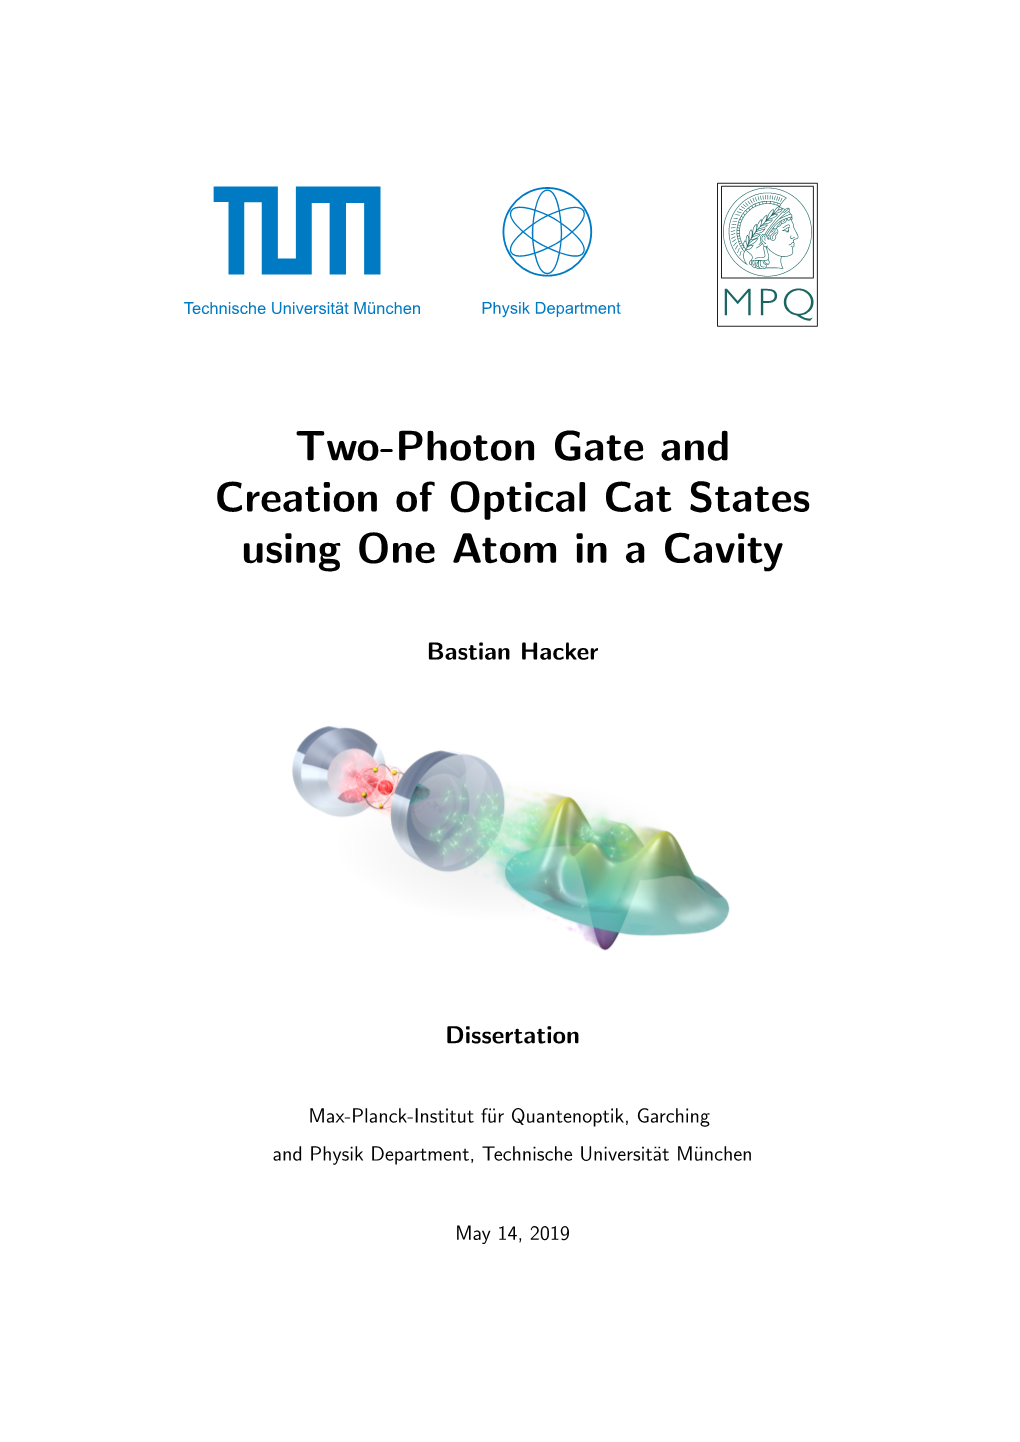 Two-Photon Gate and Creation of Optical Cat States Using One Atom in a Cavity